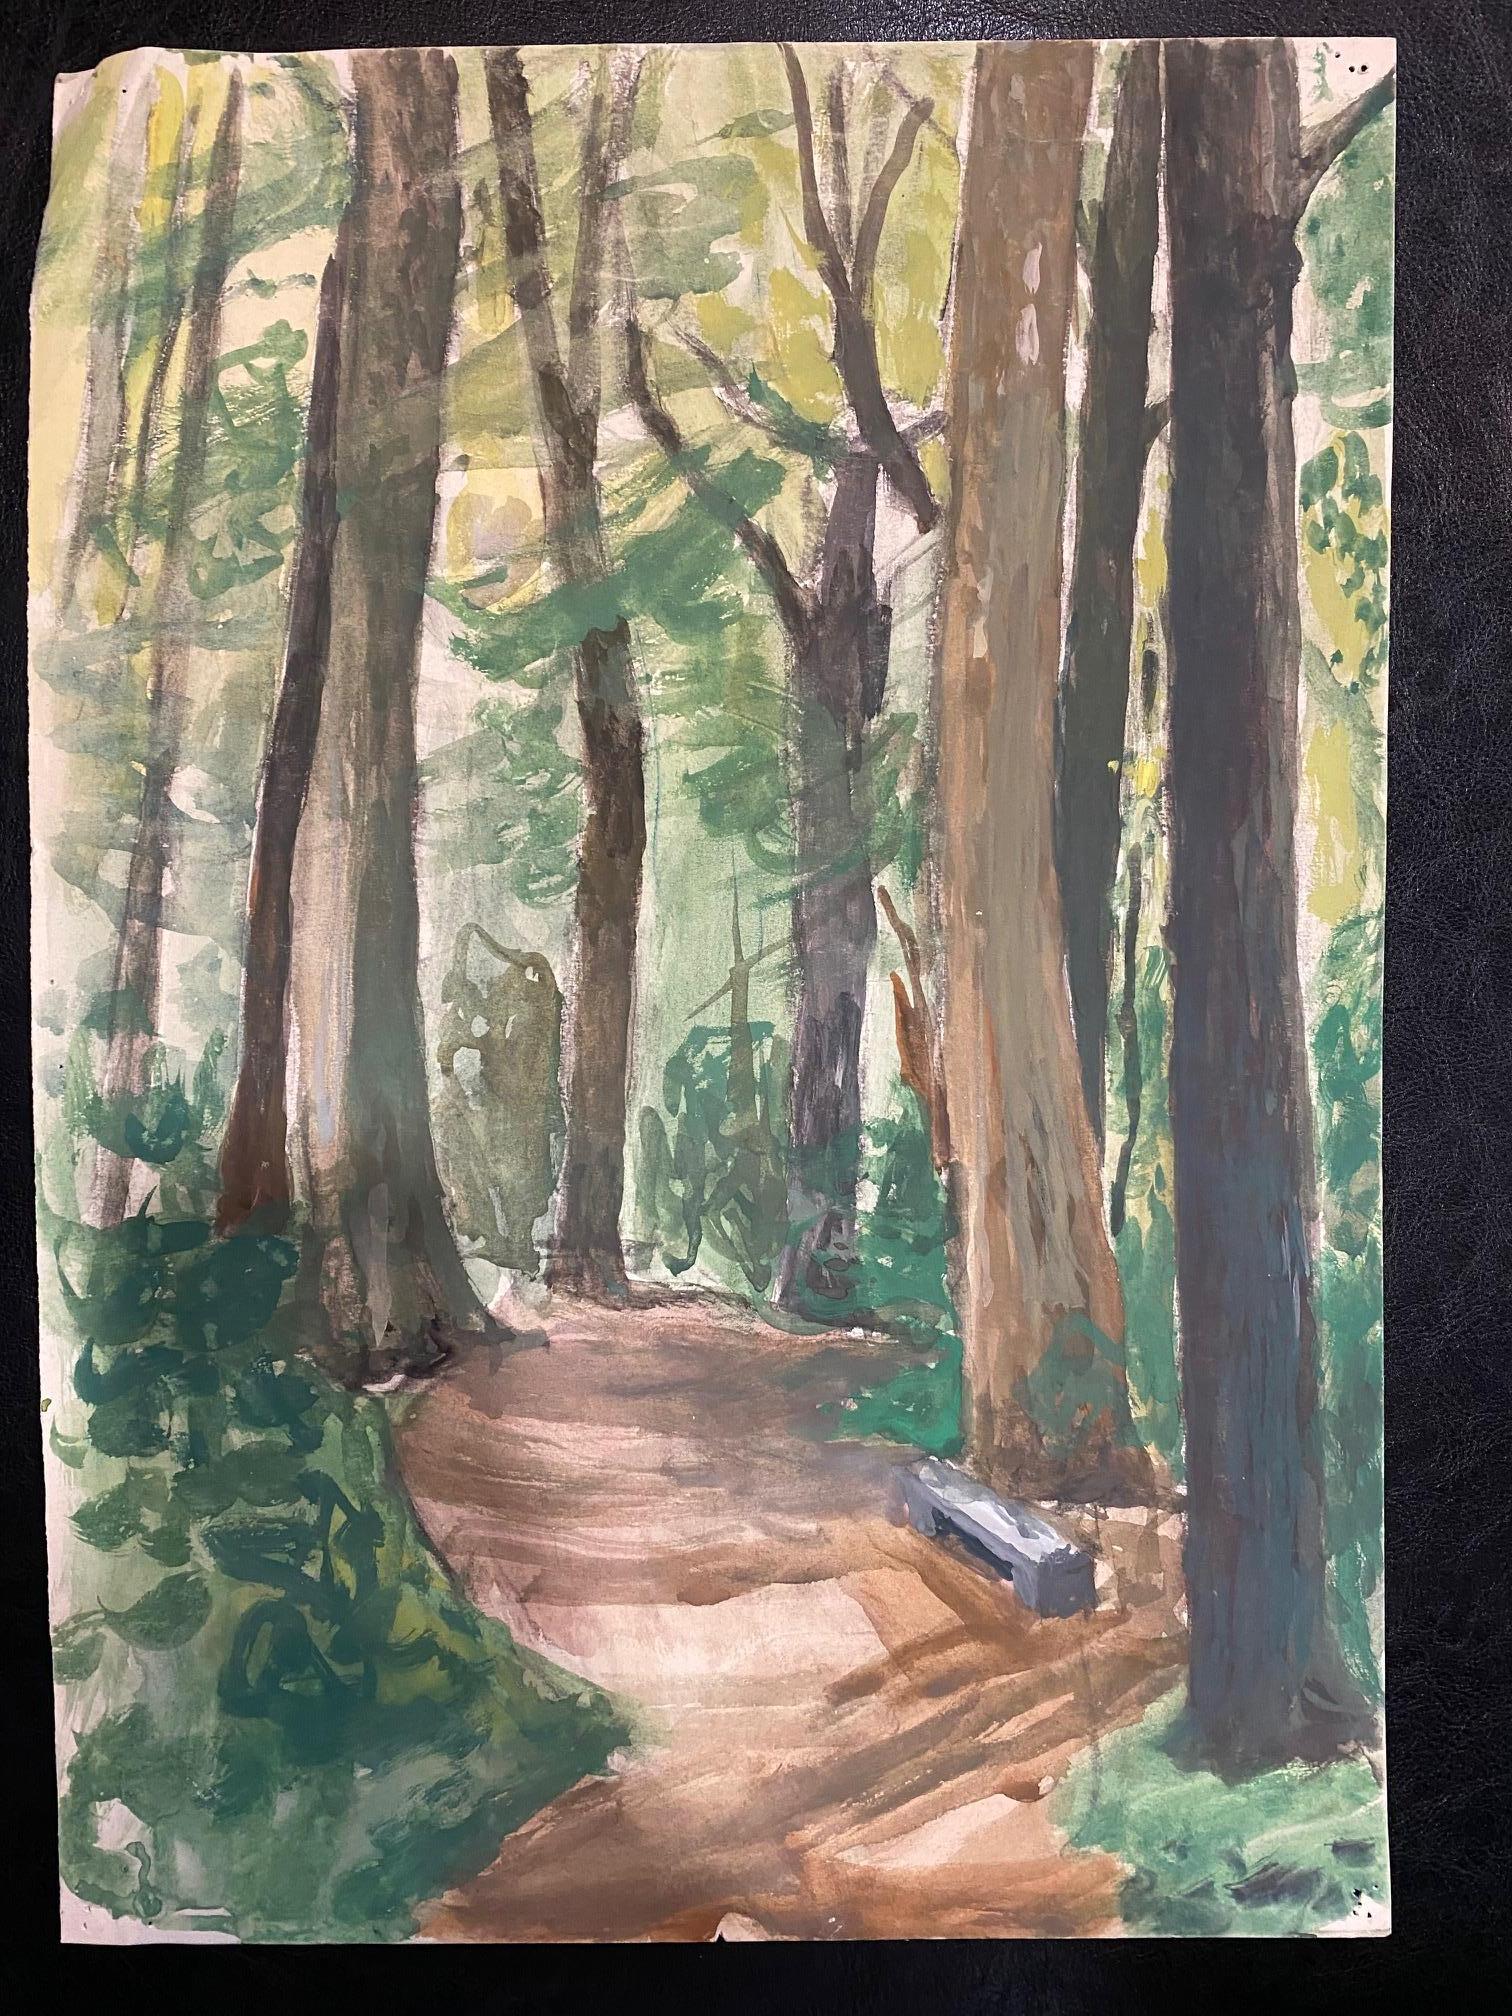 Stone bench under the woods by Charles Goetz - Watercolor 42x30 cm - Modern Art by Isaac Charles Goetz